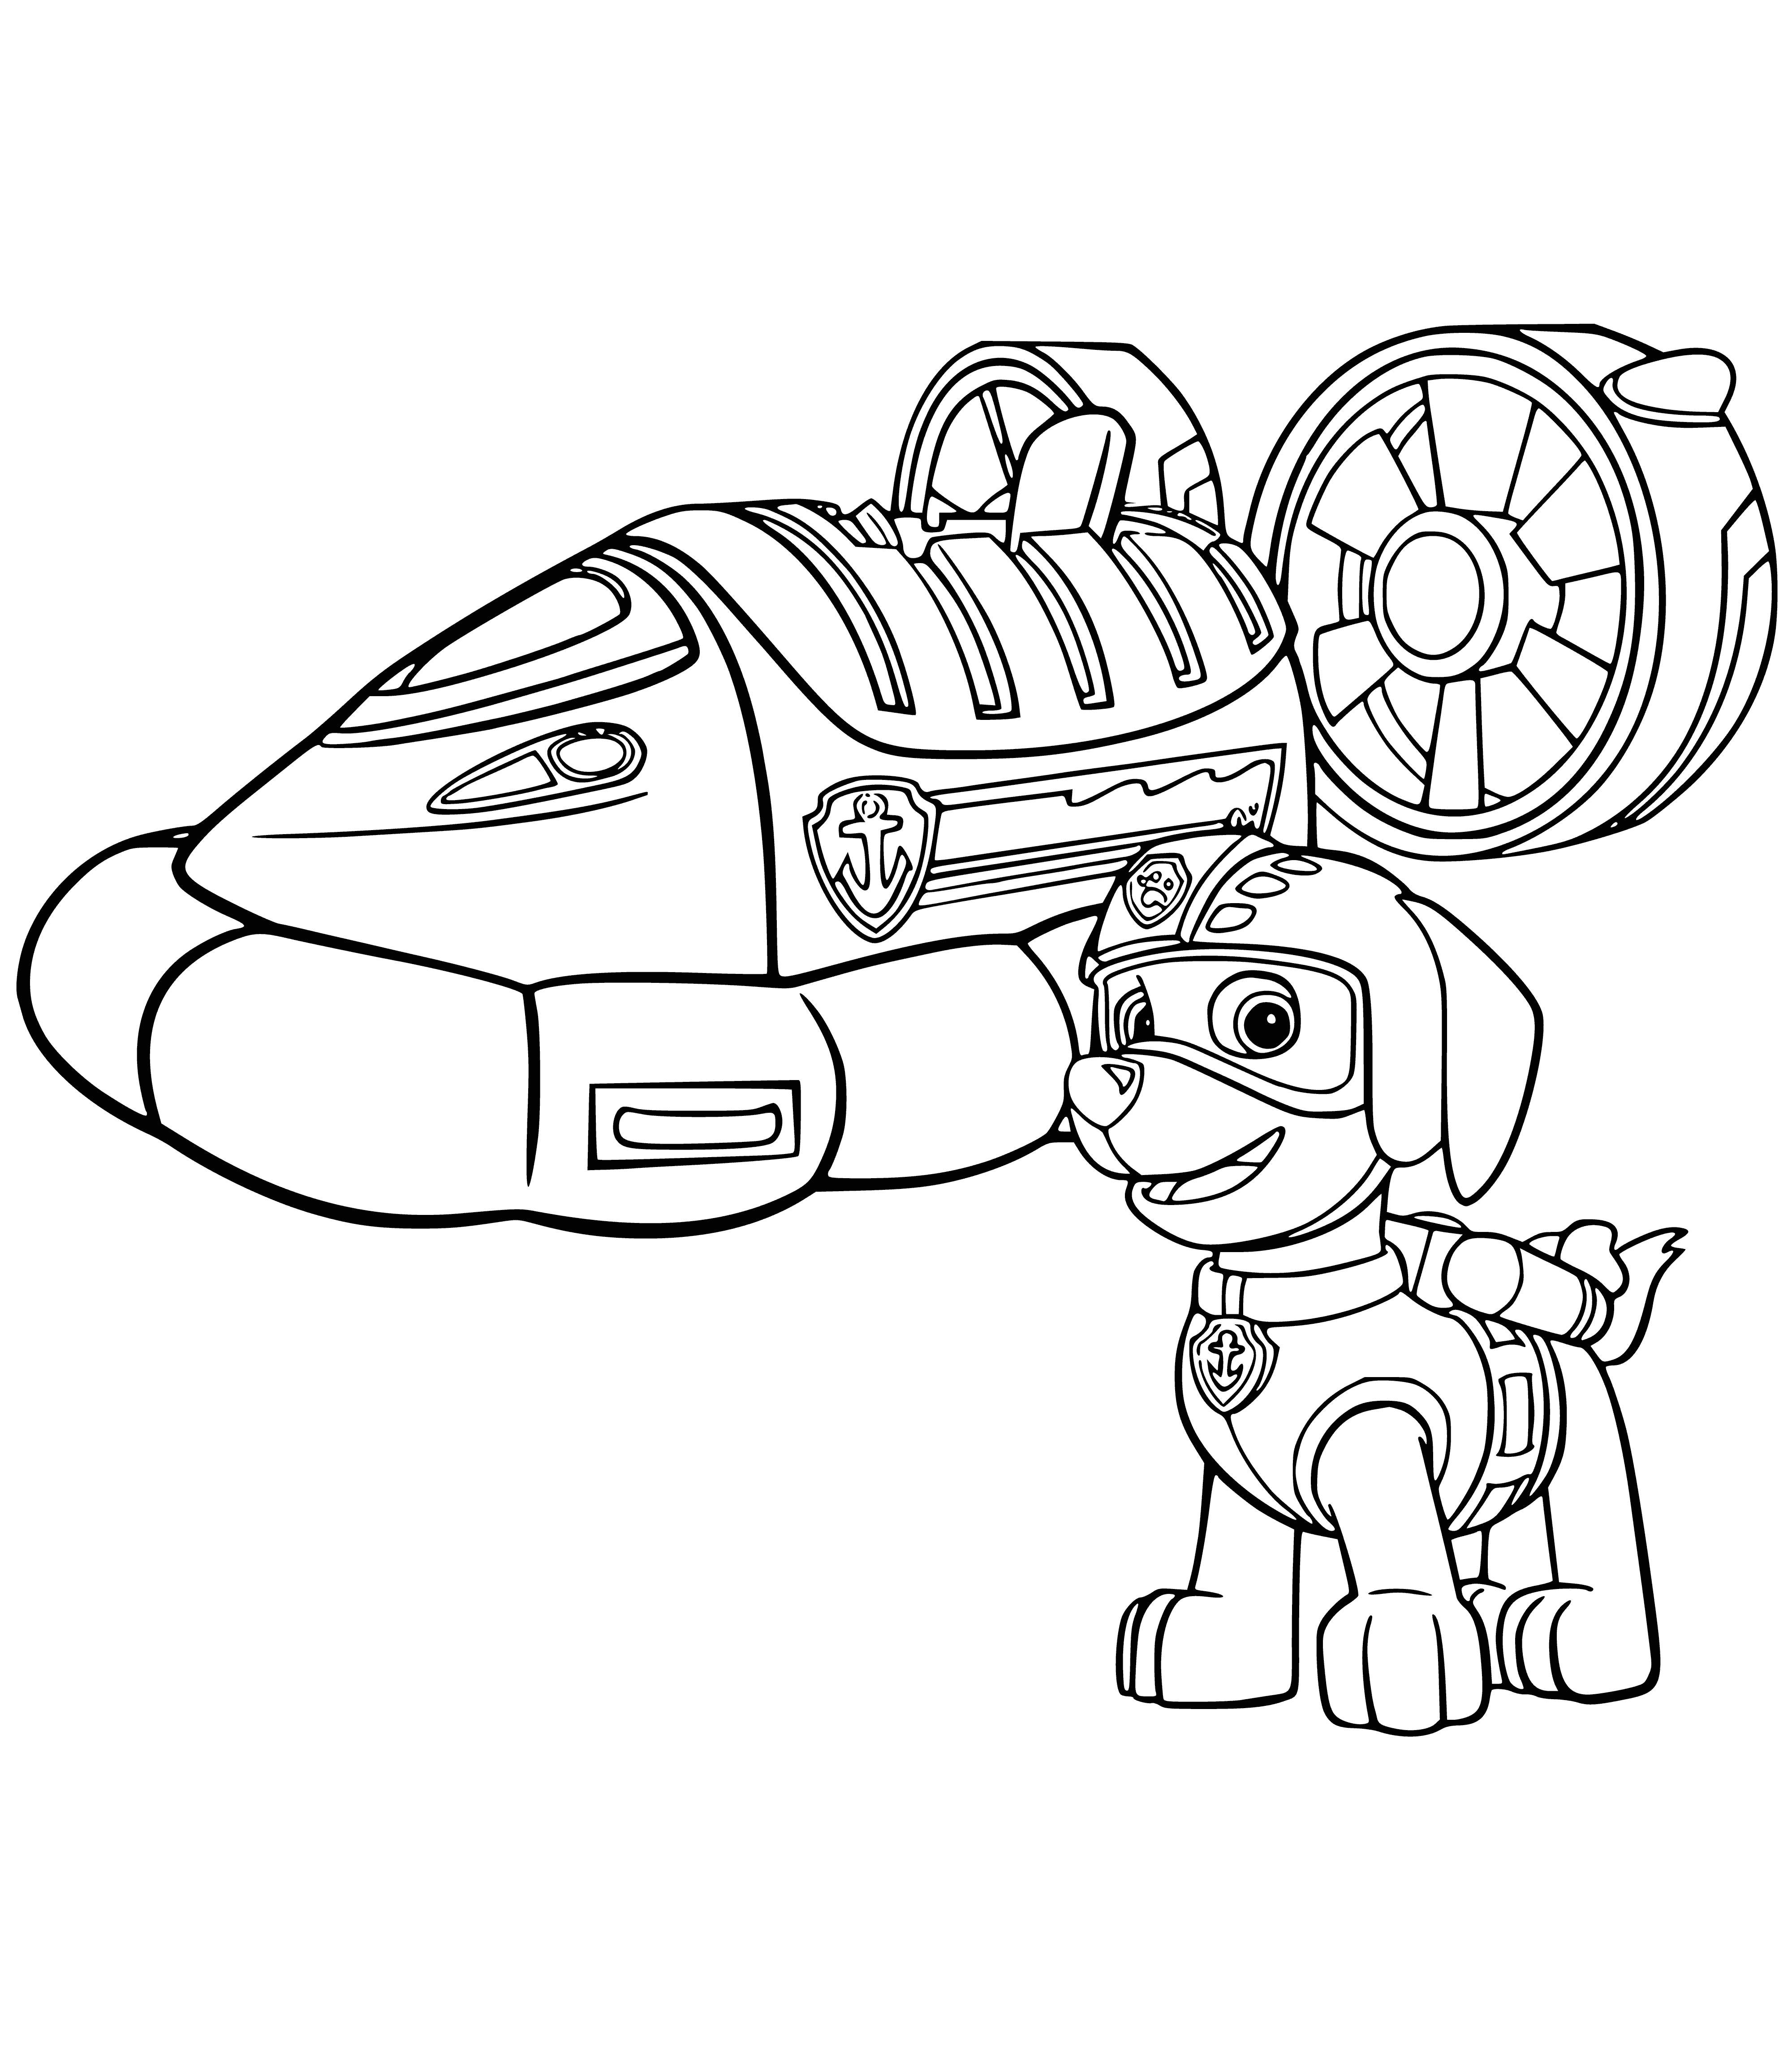 coloring page: 3" tall plastic Zuma w/ blue life jacket and orange boat (green bottom/white top) is from PAW Patrol series. Has black spots & tail and black handle.